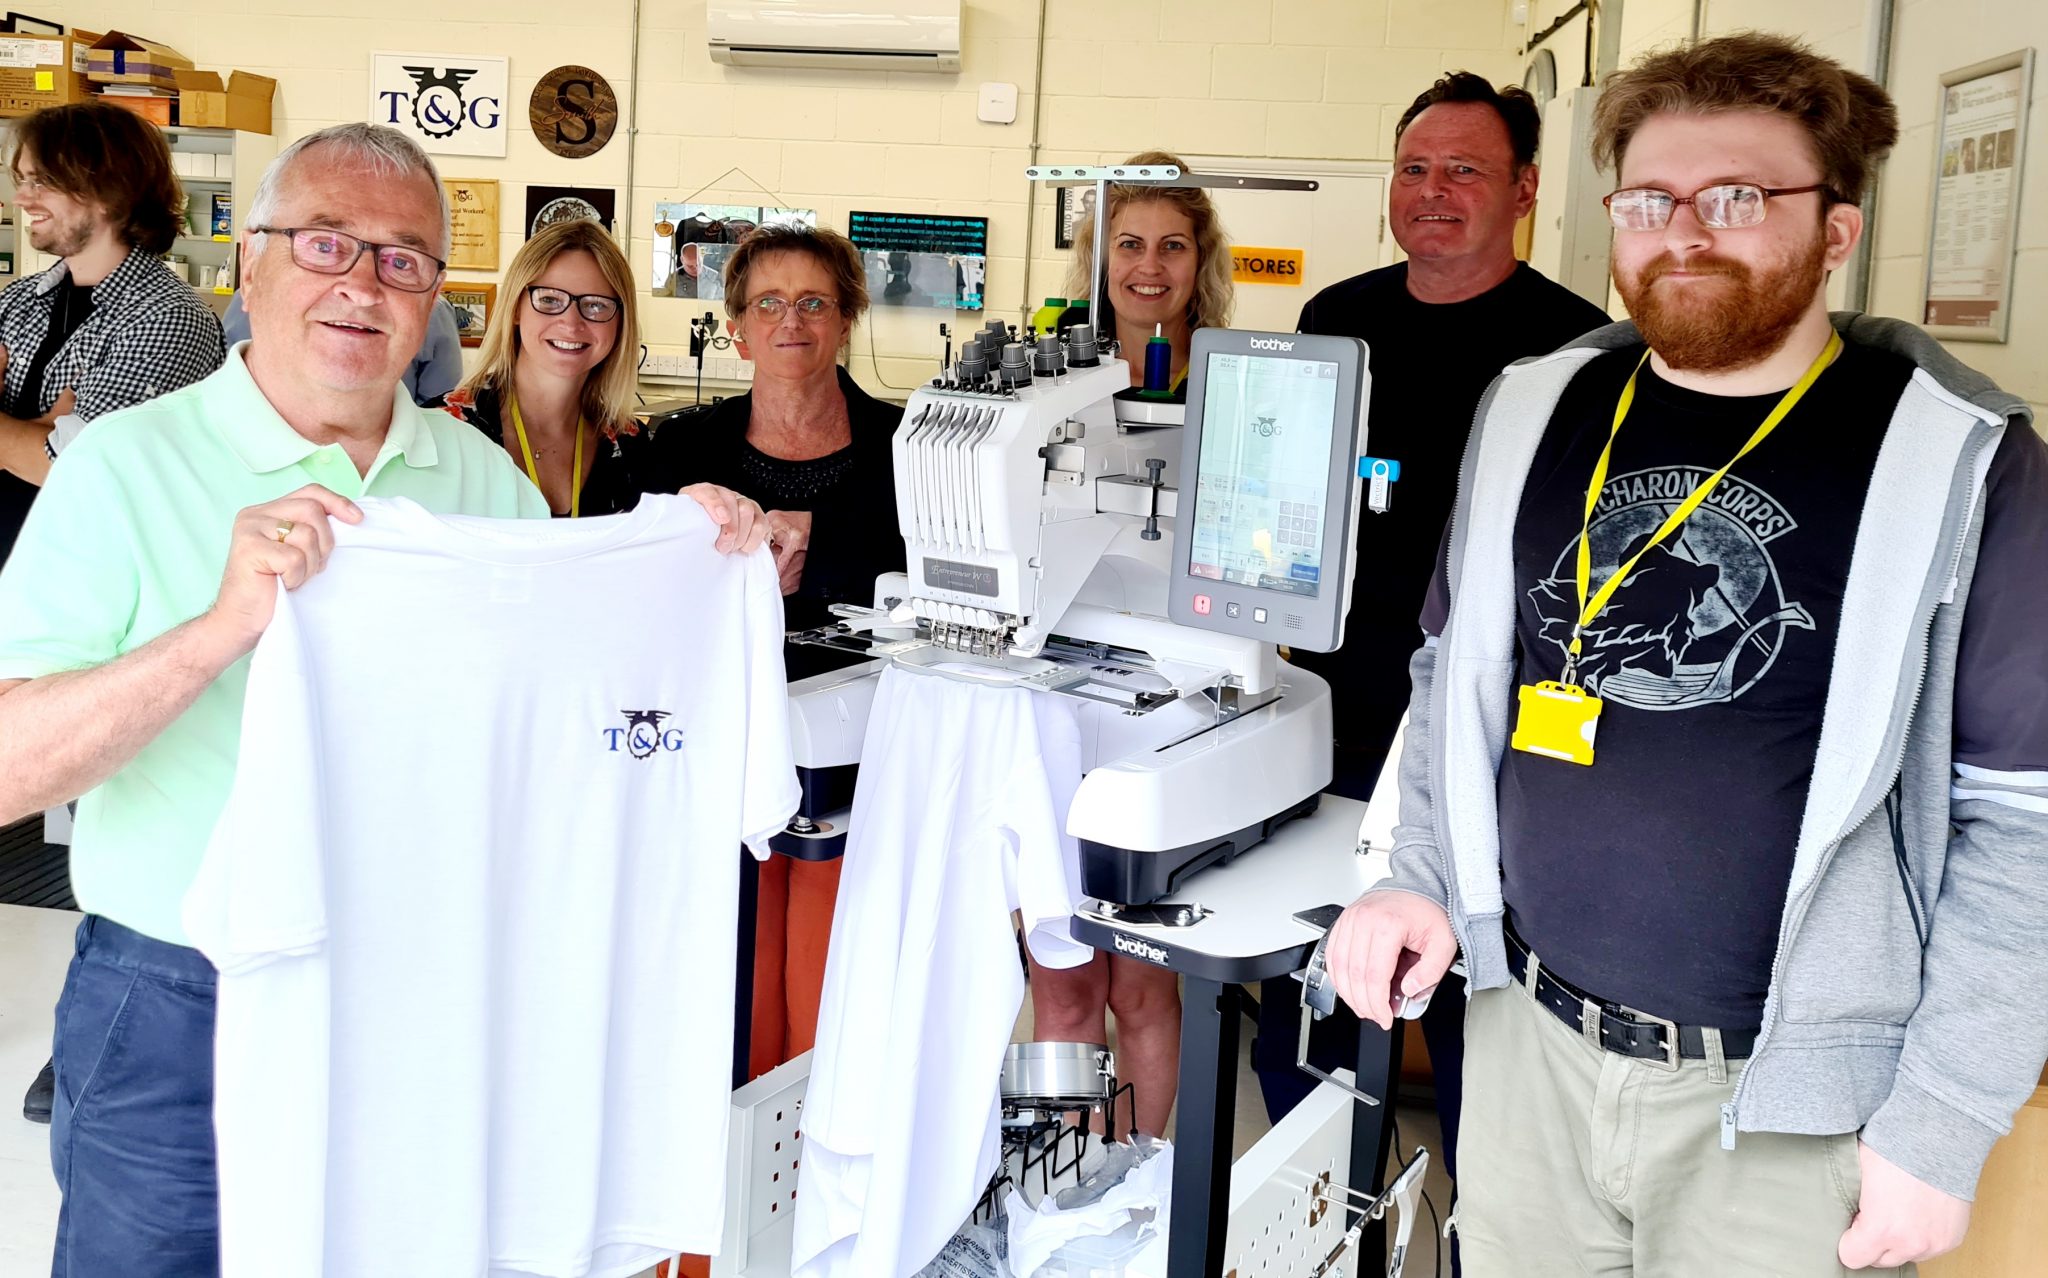 This shows Cyril on the left holding a t-shirt made in our Fab Lab 